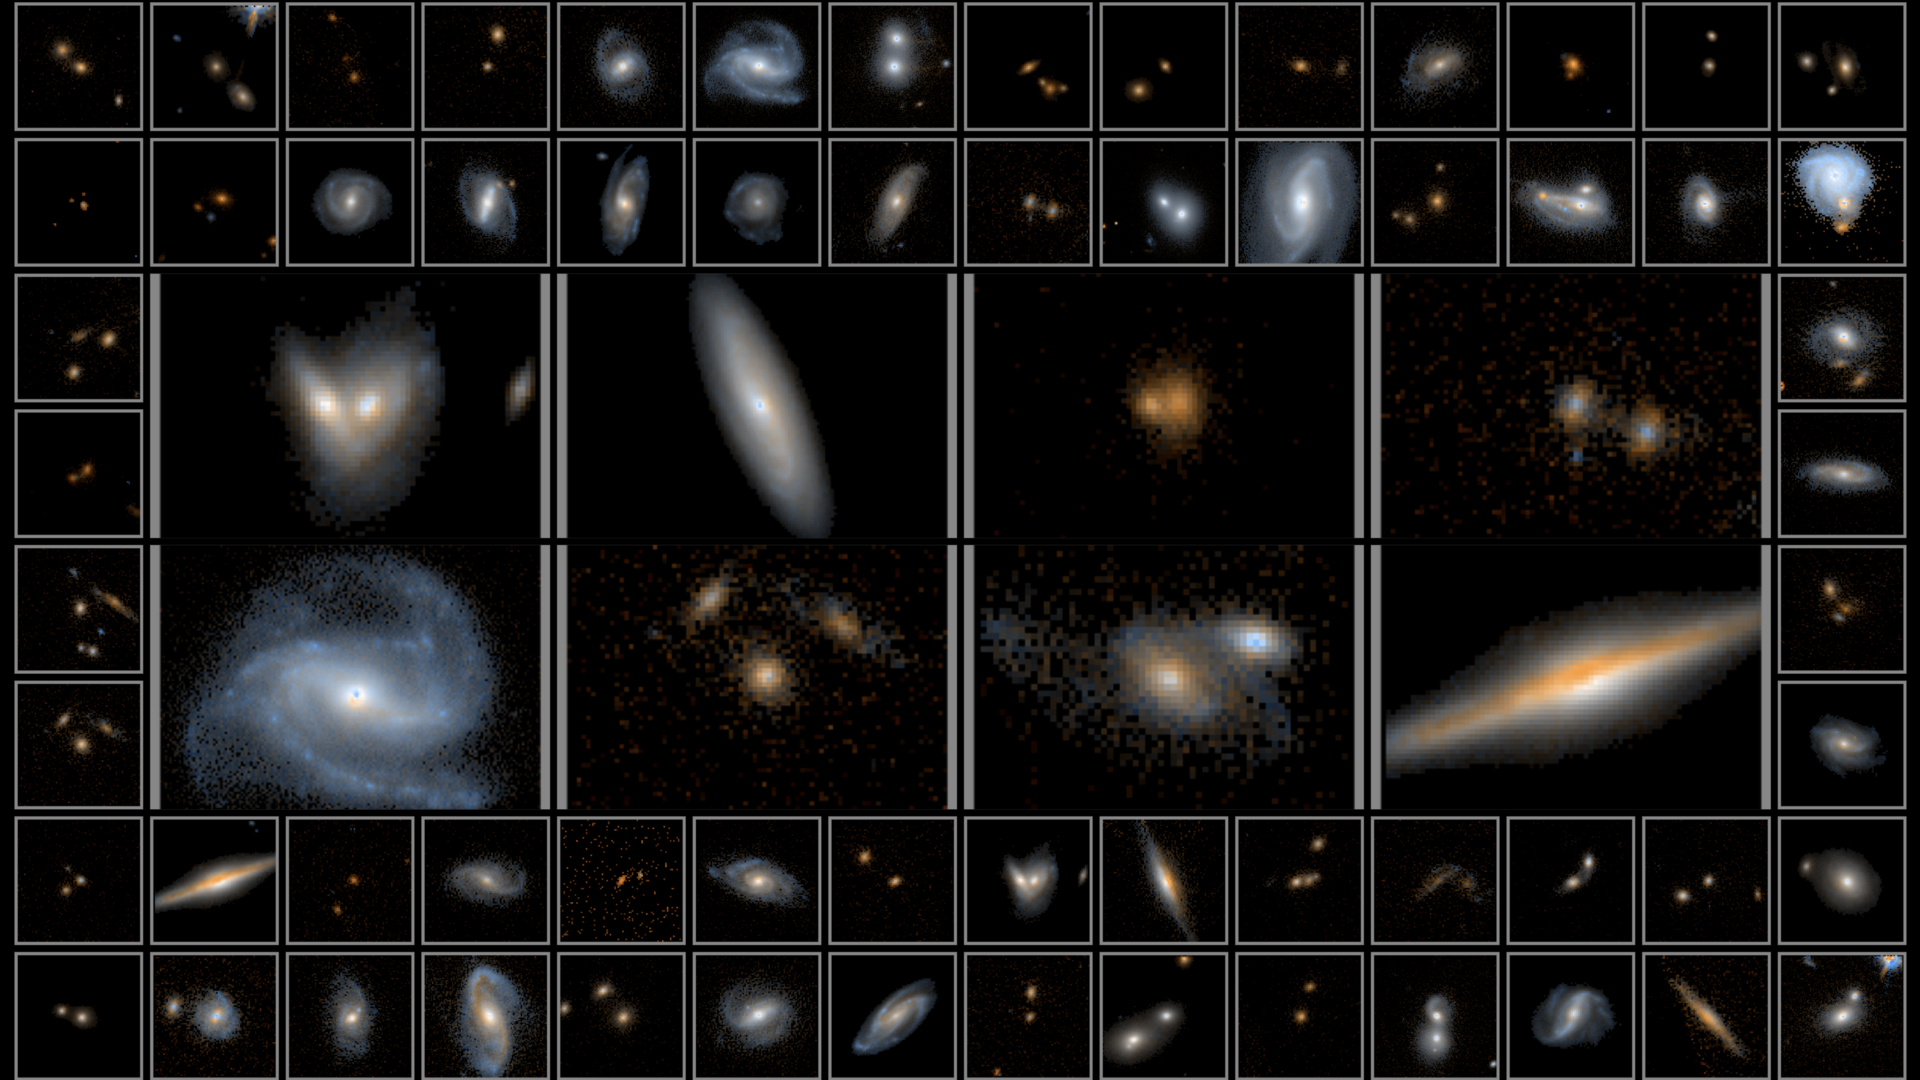 Image compilation of galaxies